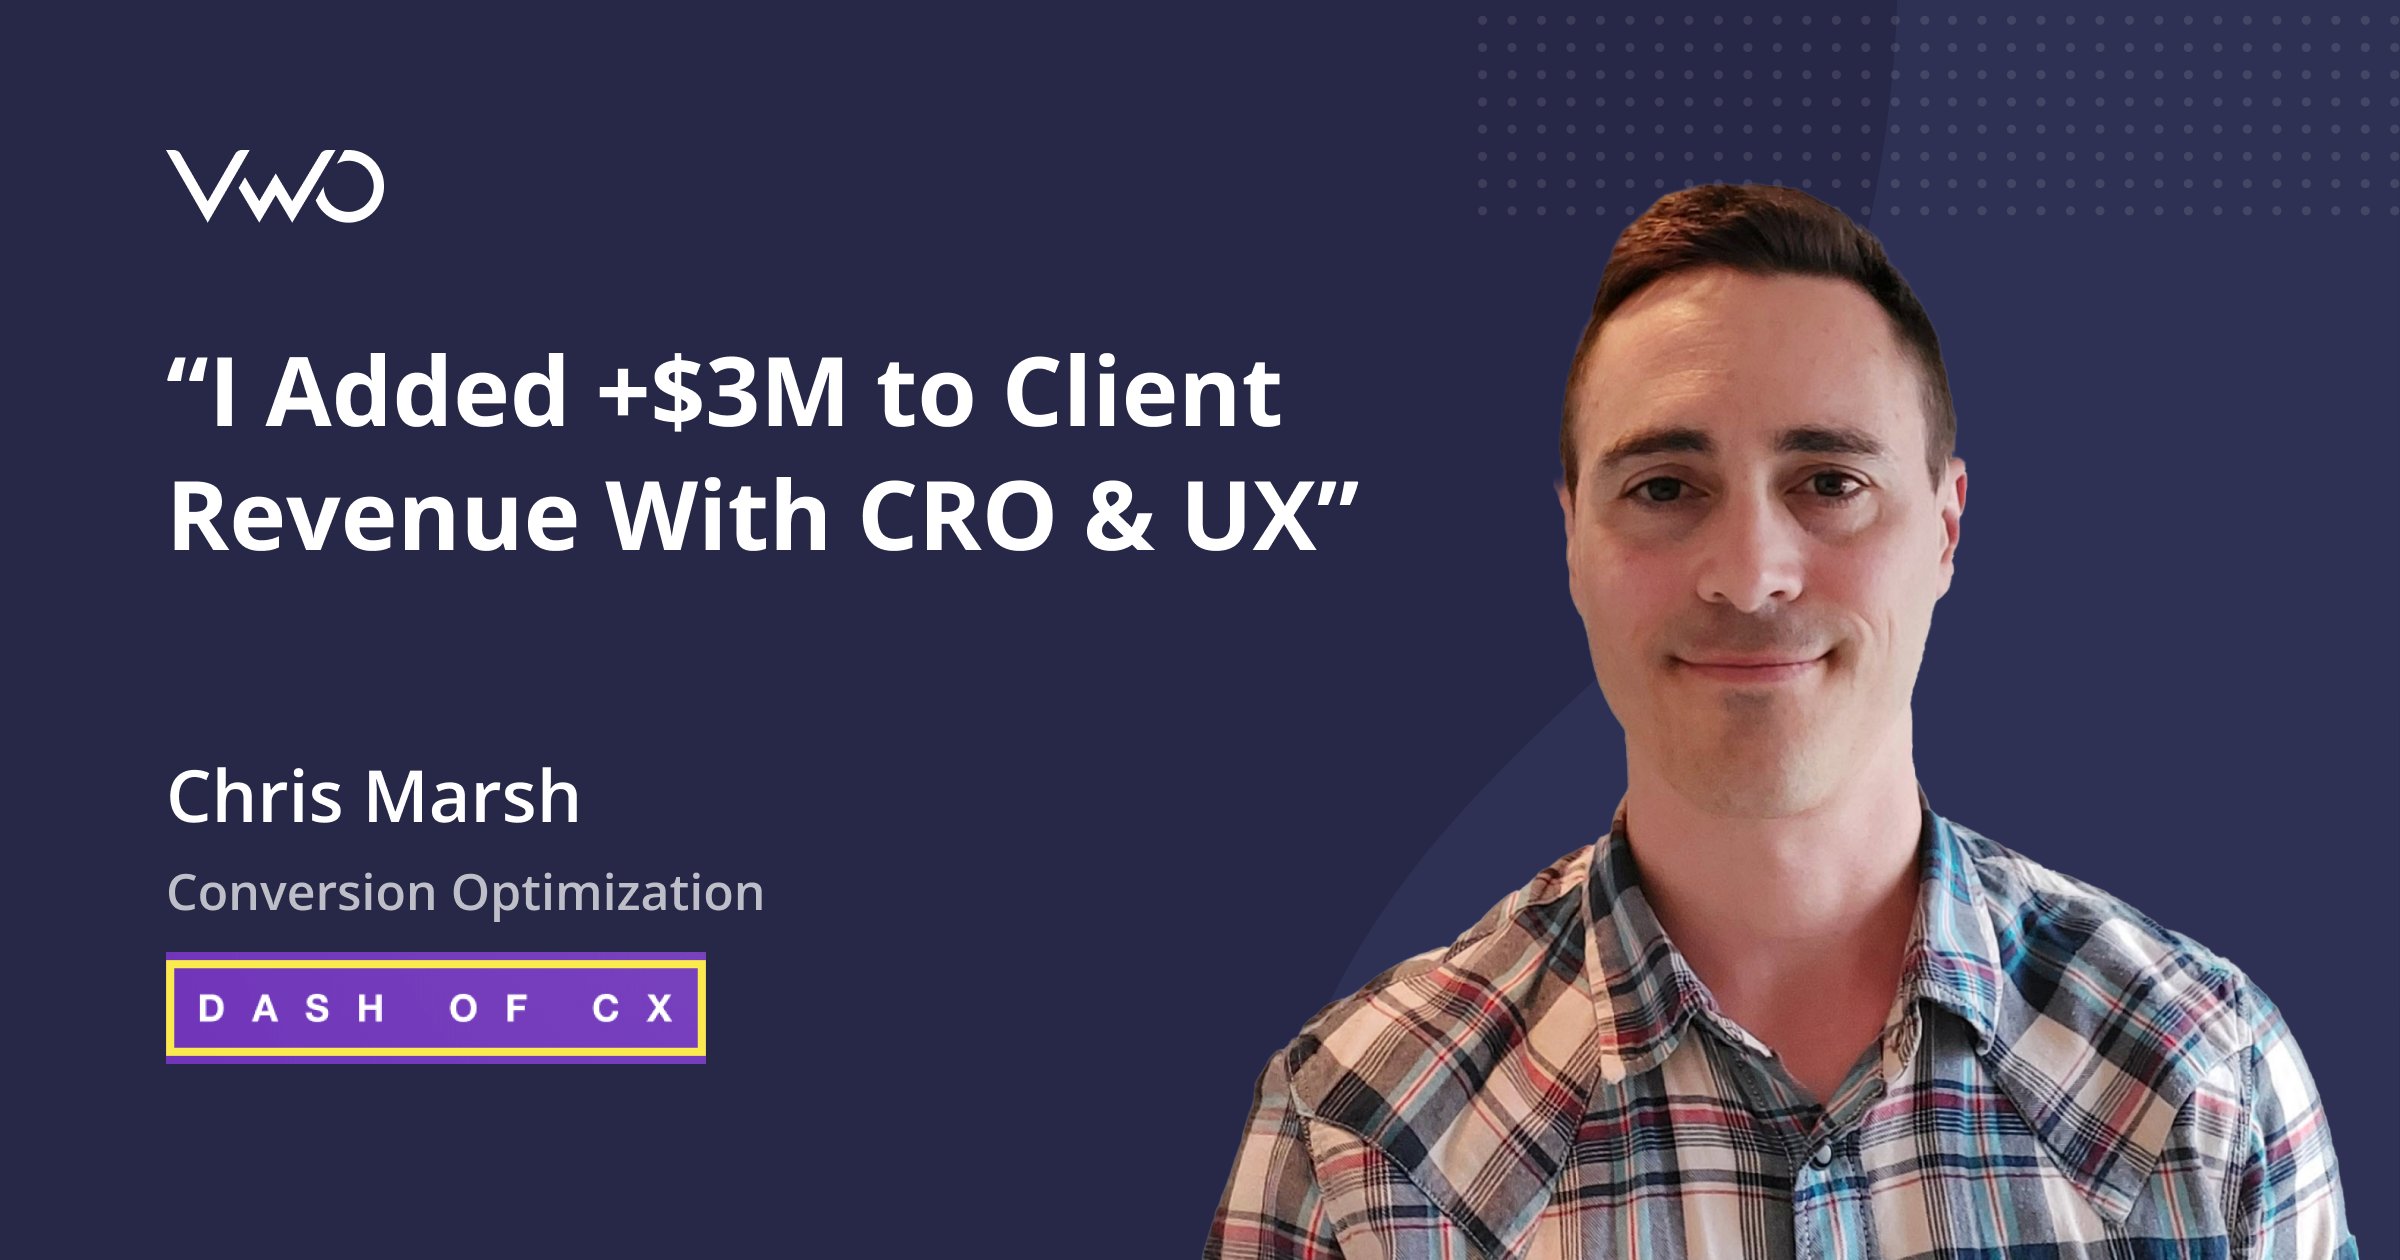 I Added +$3M to Client Revenue With CRO & UX